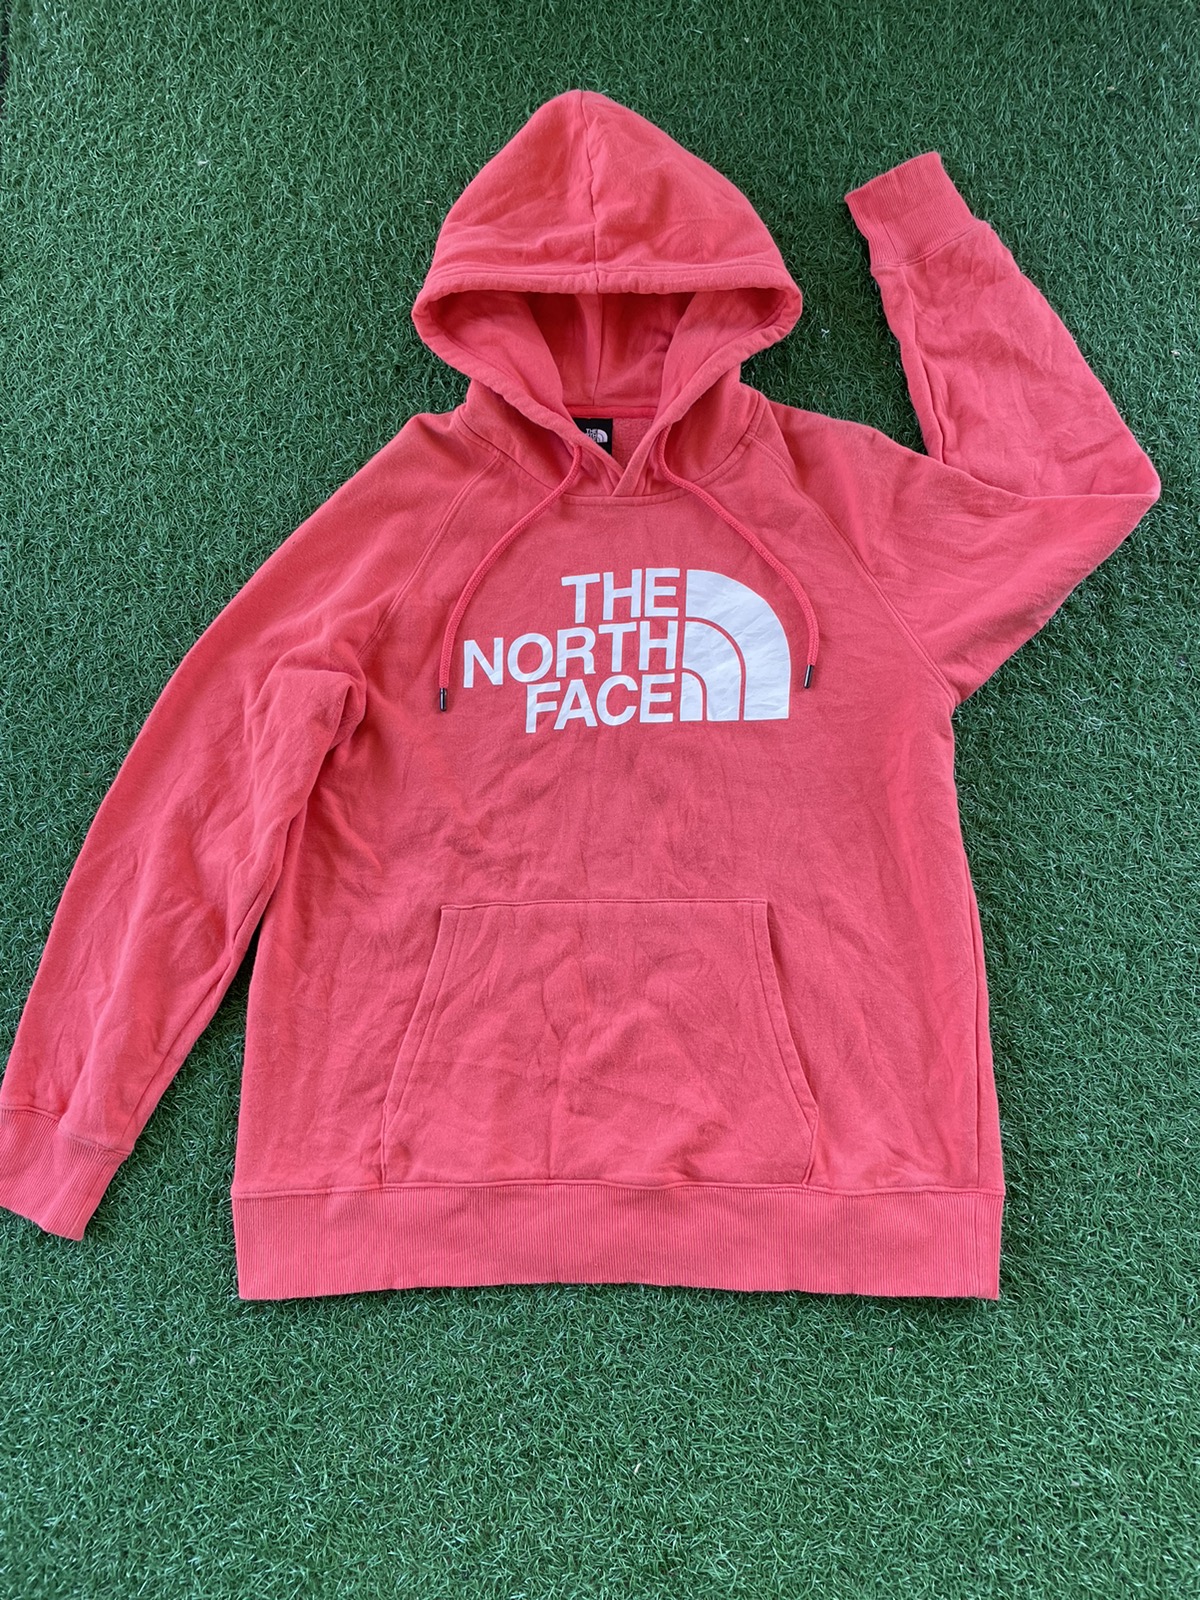 💥The North Face Big Logo Hoodie Unisex - 1